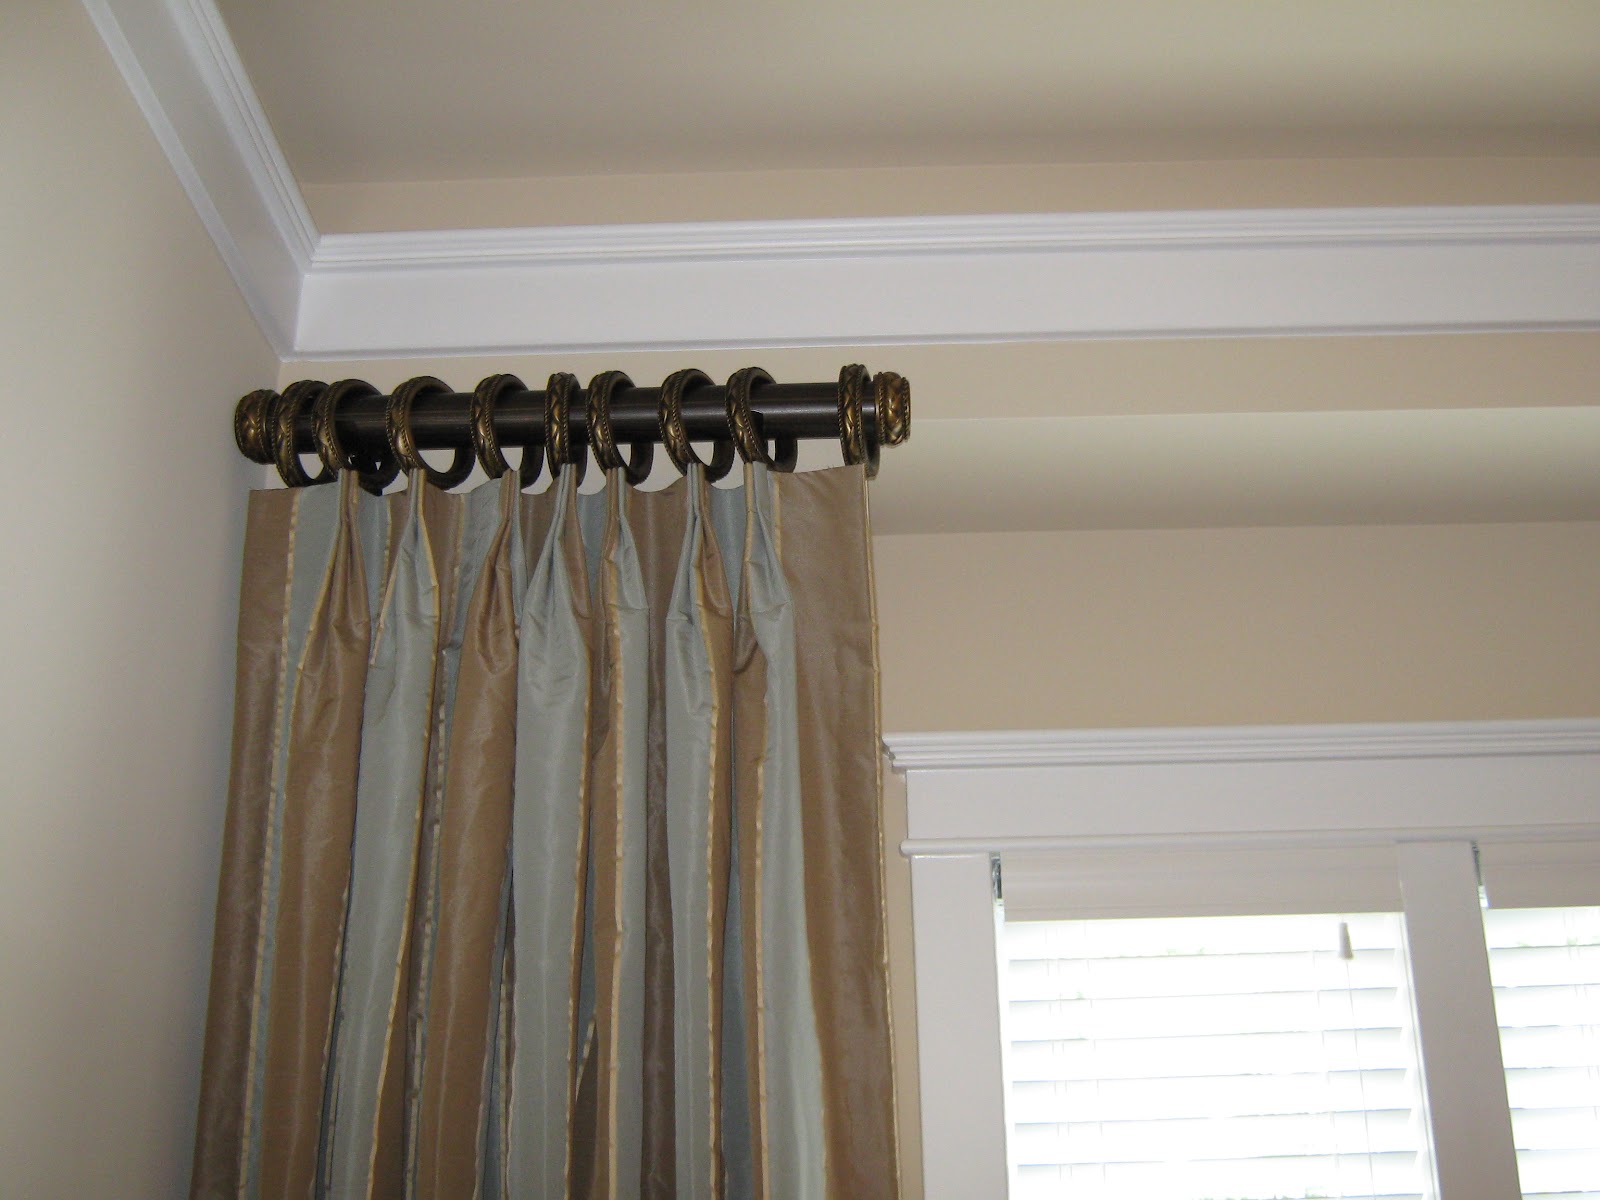 Outdoor Curtain Track System Wooden Window Curtain Rods